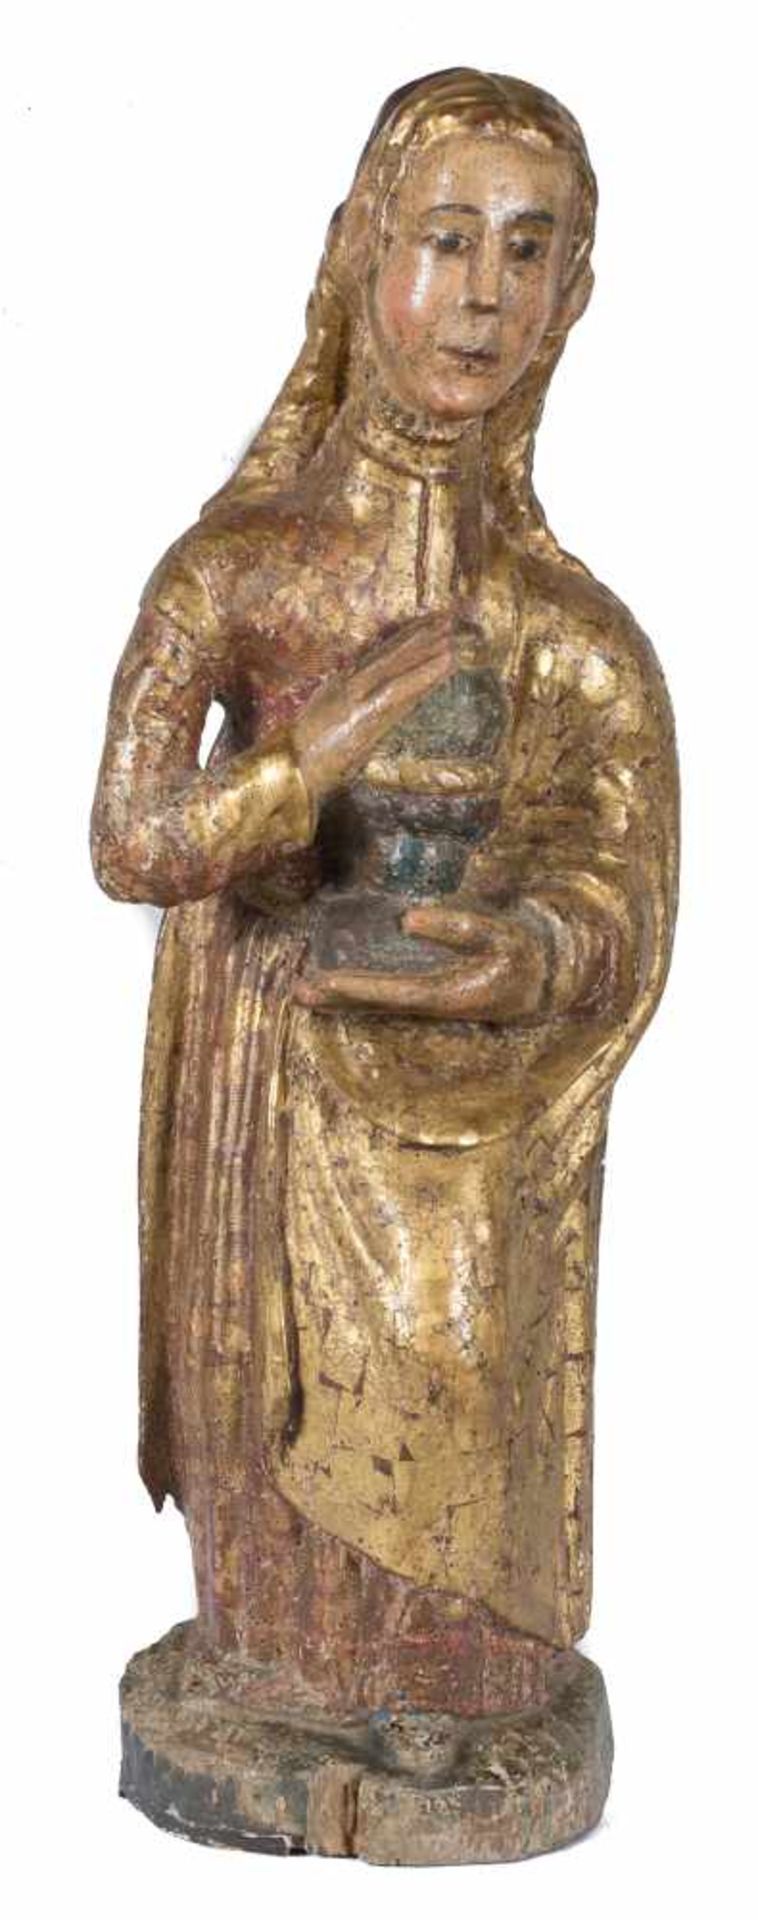 Saint Barbara. Carved, gilded and polychromed wooden sculpture. Late Gothic. Circa 1500.Saint